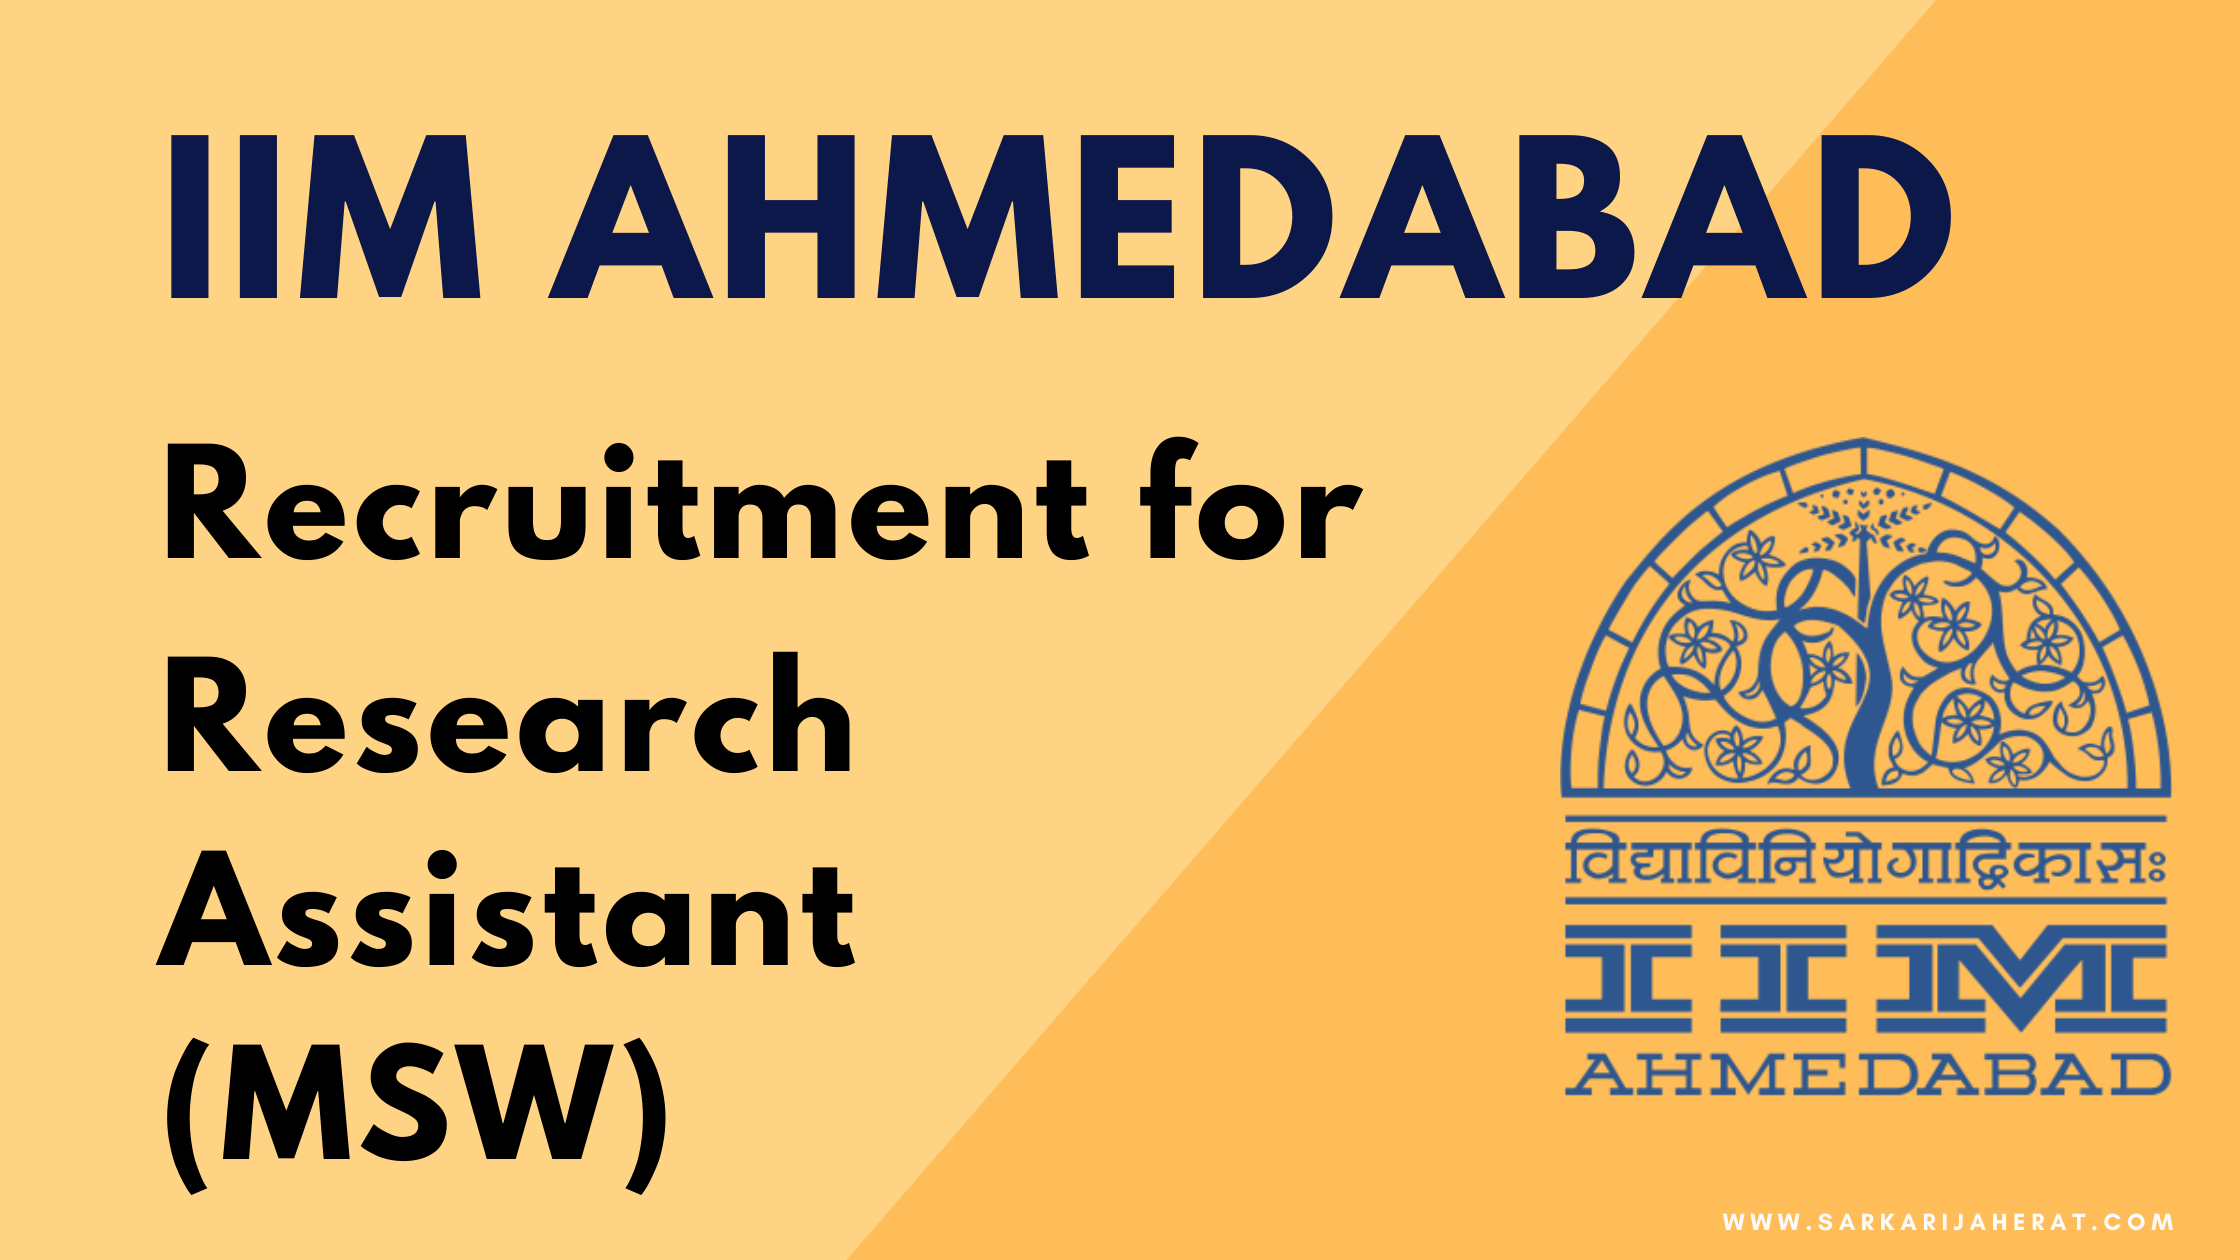 IIM Ahmedabad Recruitment for Research Assistant